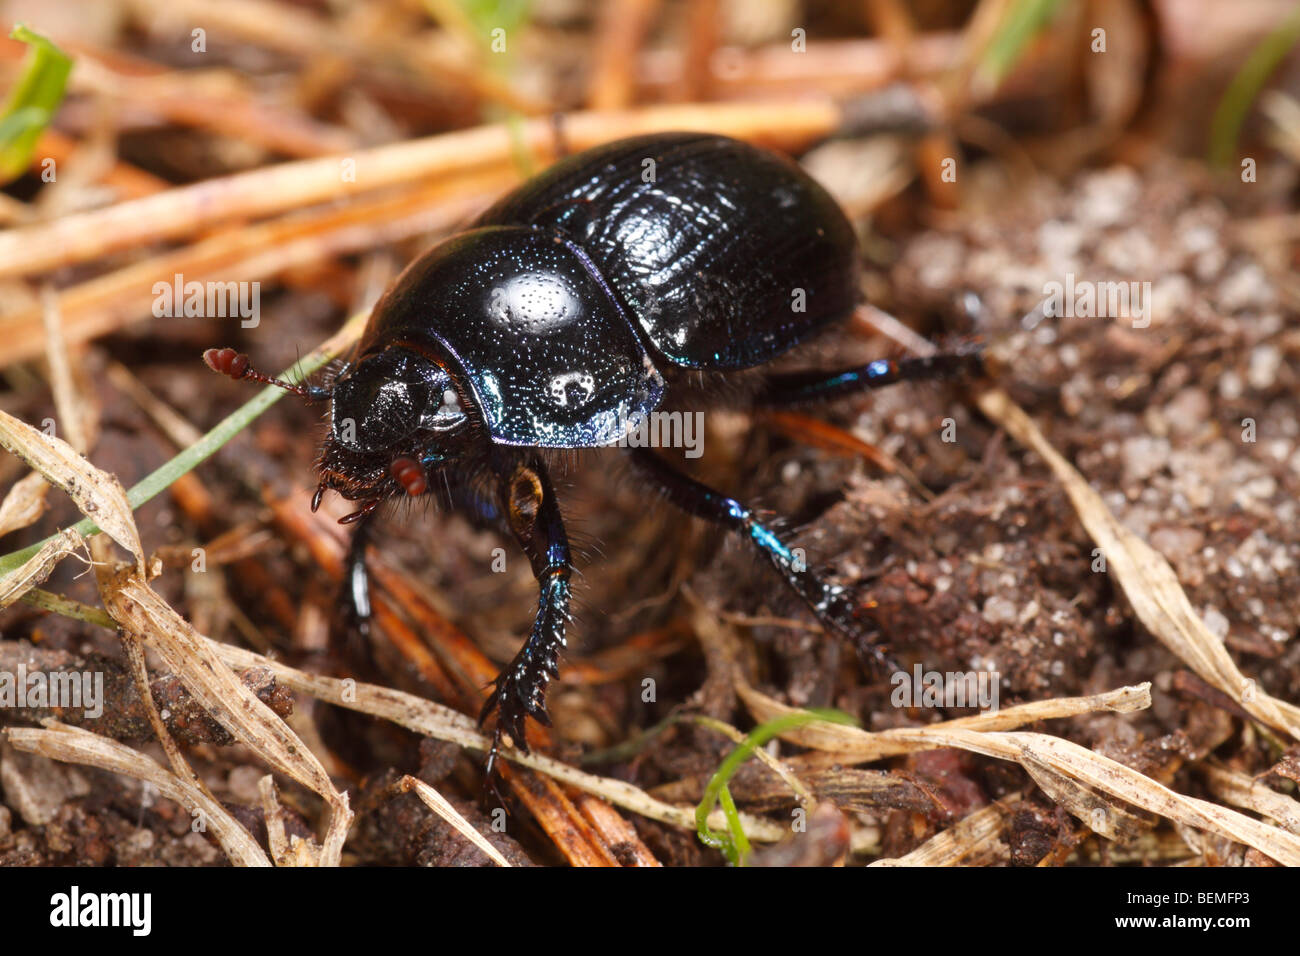 Dor Beetle (Geotrupes stercorarius), a dung beetle Stock Photo